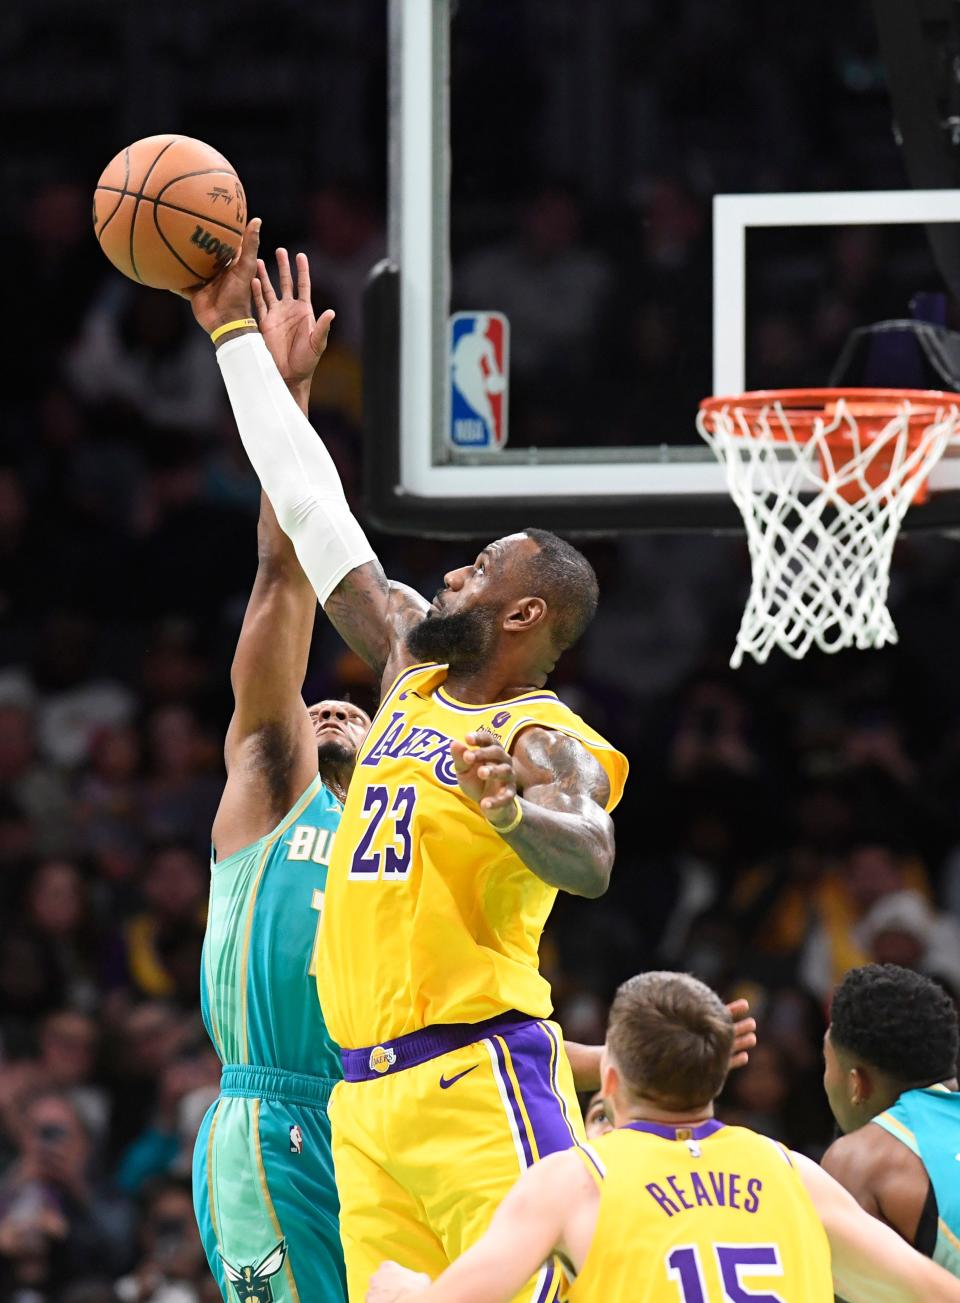 Feb. 5: The Los Angeles Lakers' LeBron James (23) gets a rebound against the Charlotte Hornets' Brandon Miller during the second half at the Spectrum Center.